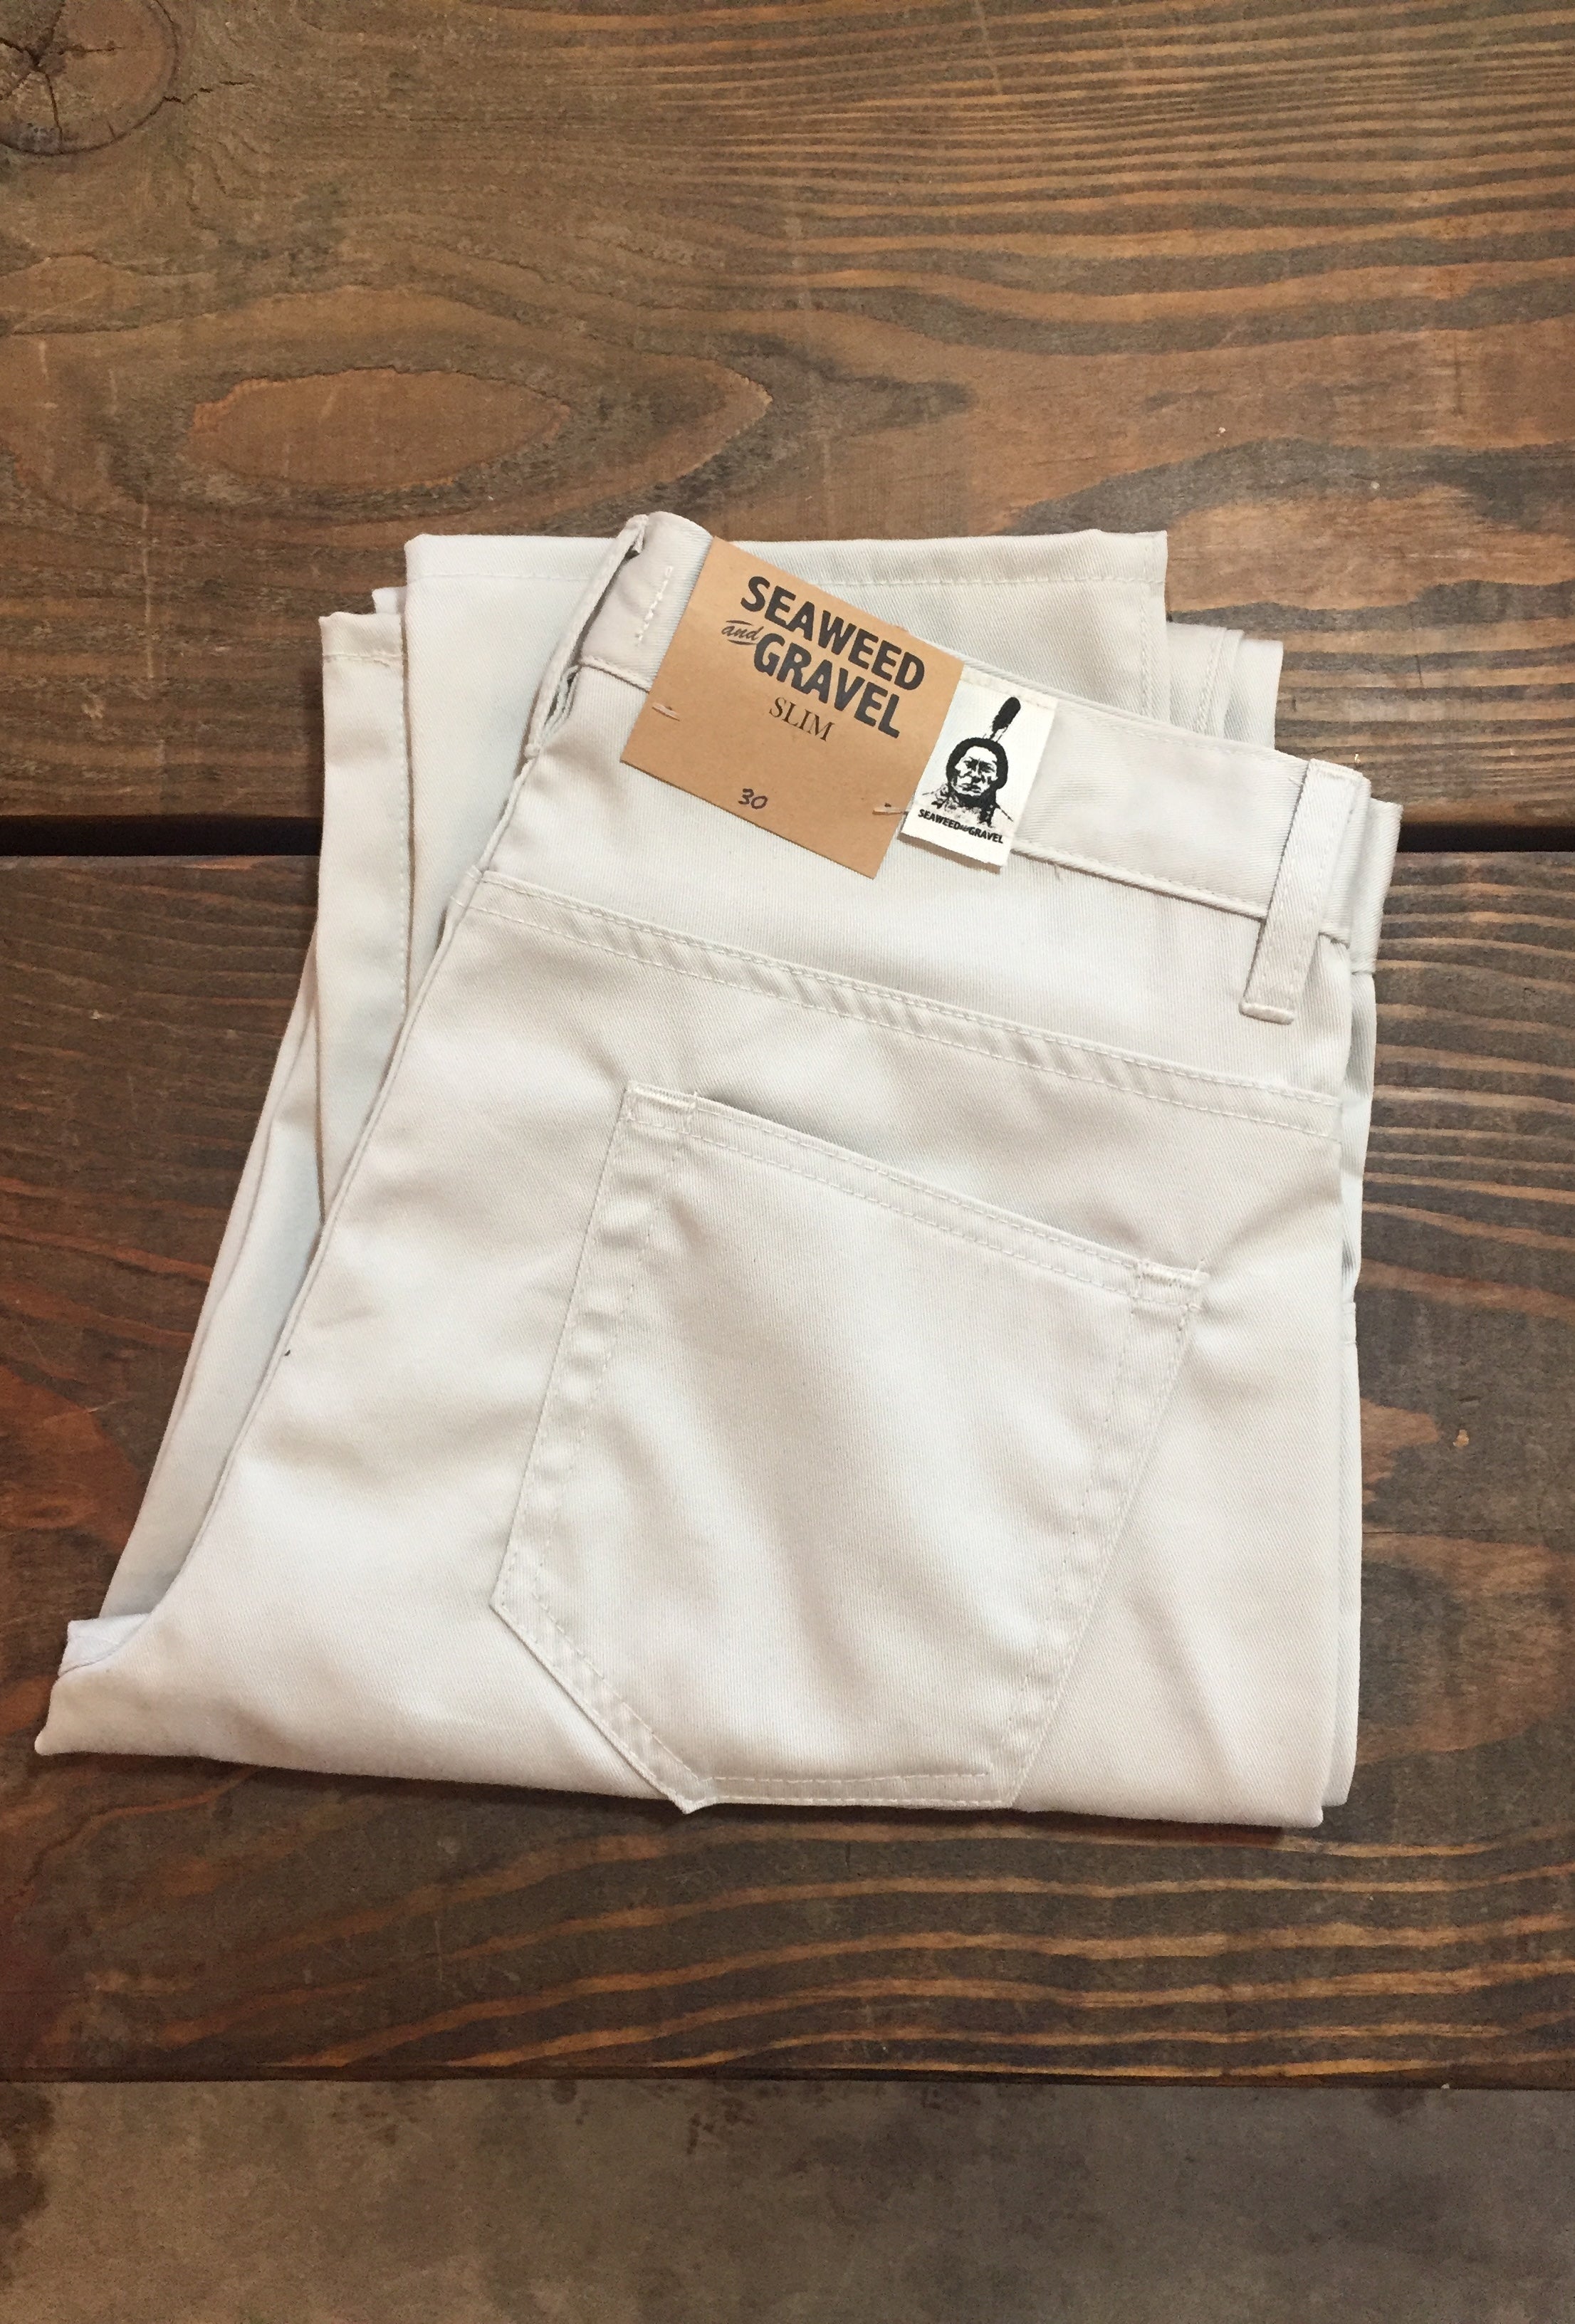 Twill Slim Pant by S&G take 30% Off Price